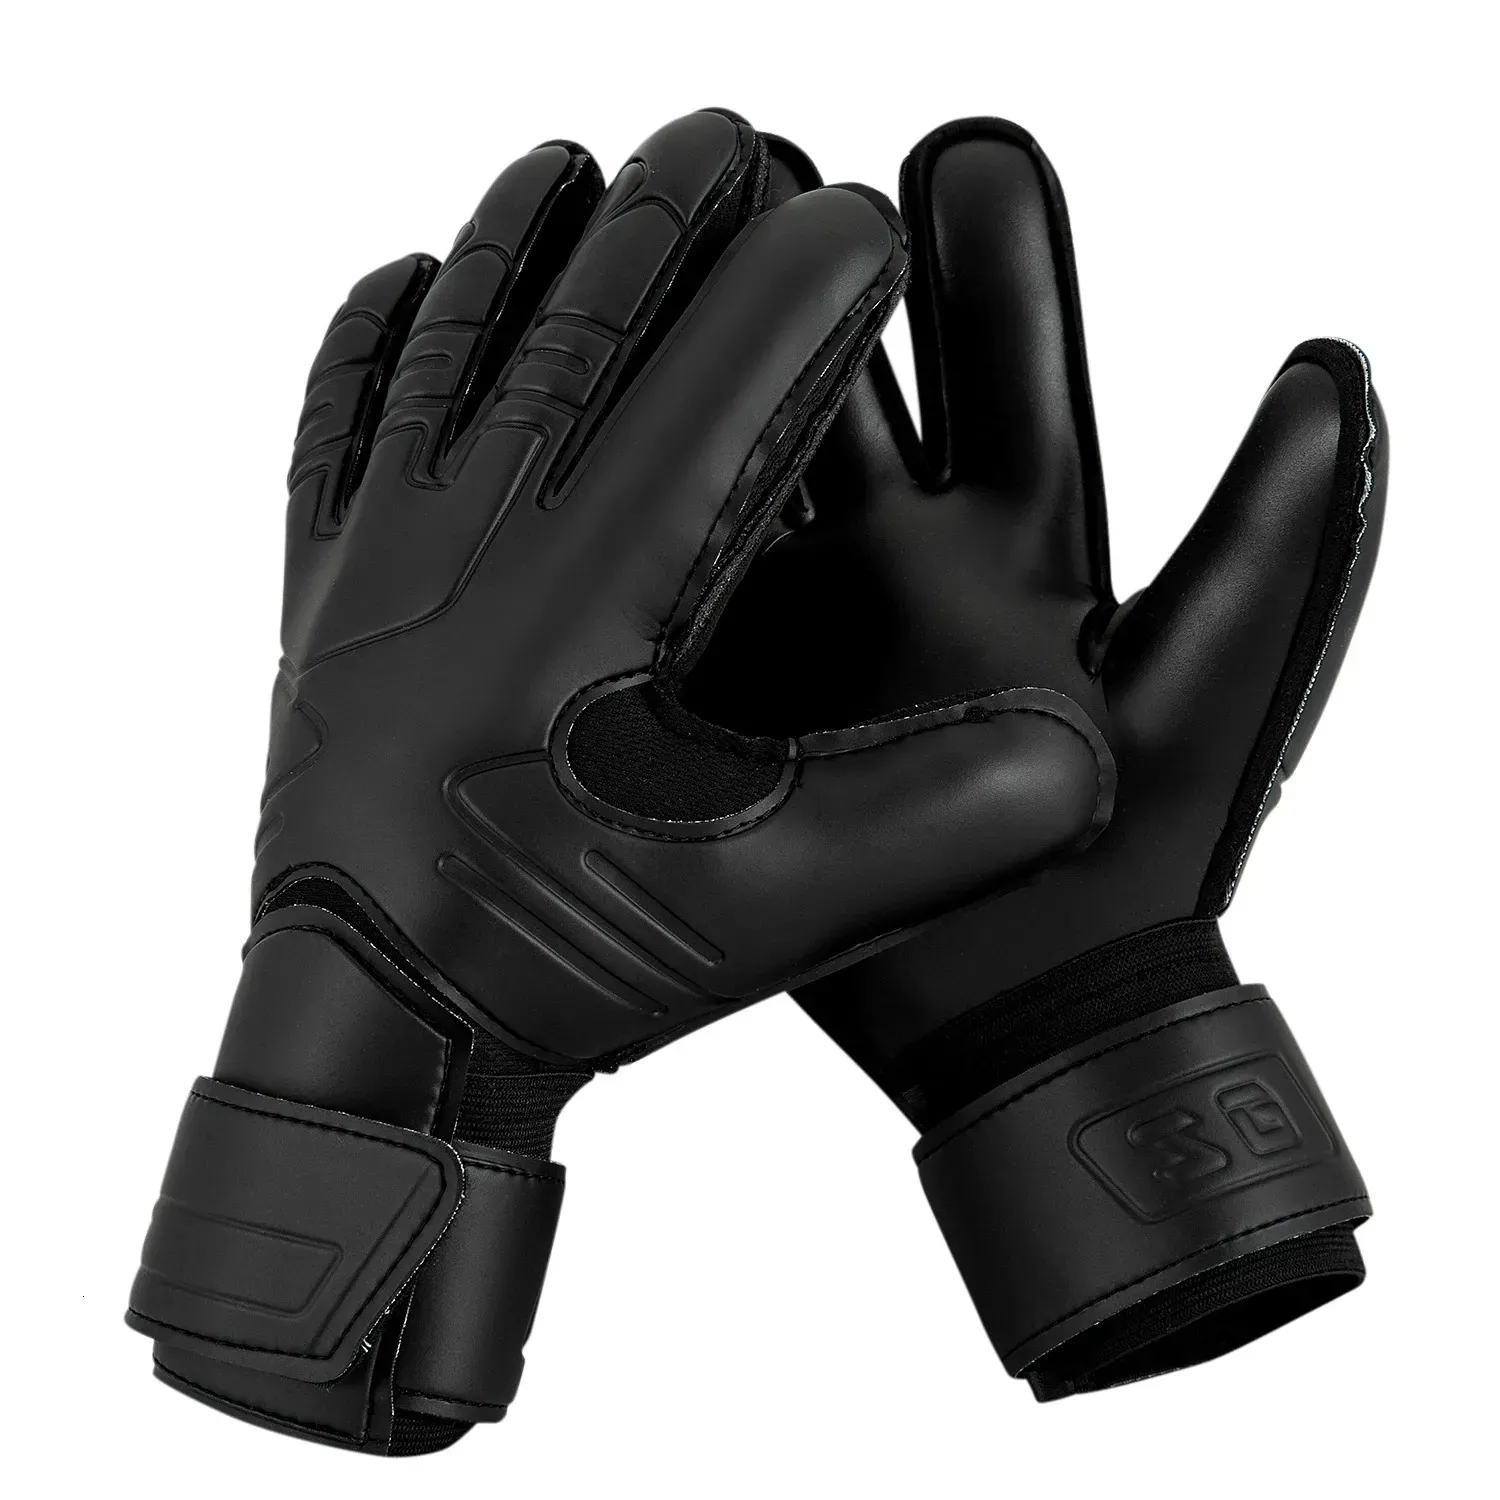 Sports Gloves 1 Pair Black Size 7-10 Goalkeeper Gloves WIth Finger Protector Air Vent Soccer Goalie Football Latex 231218